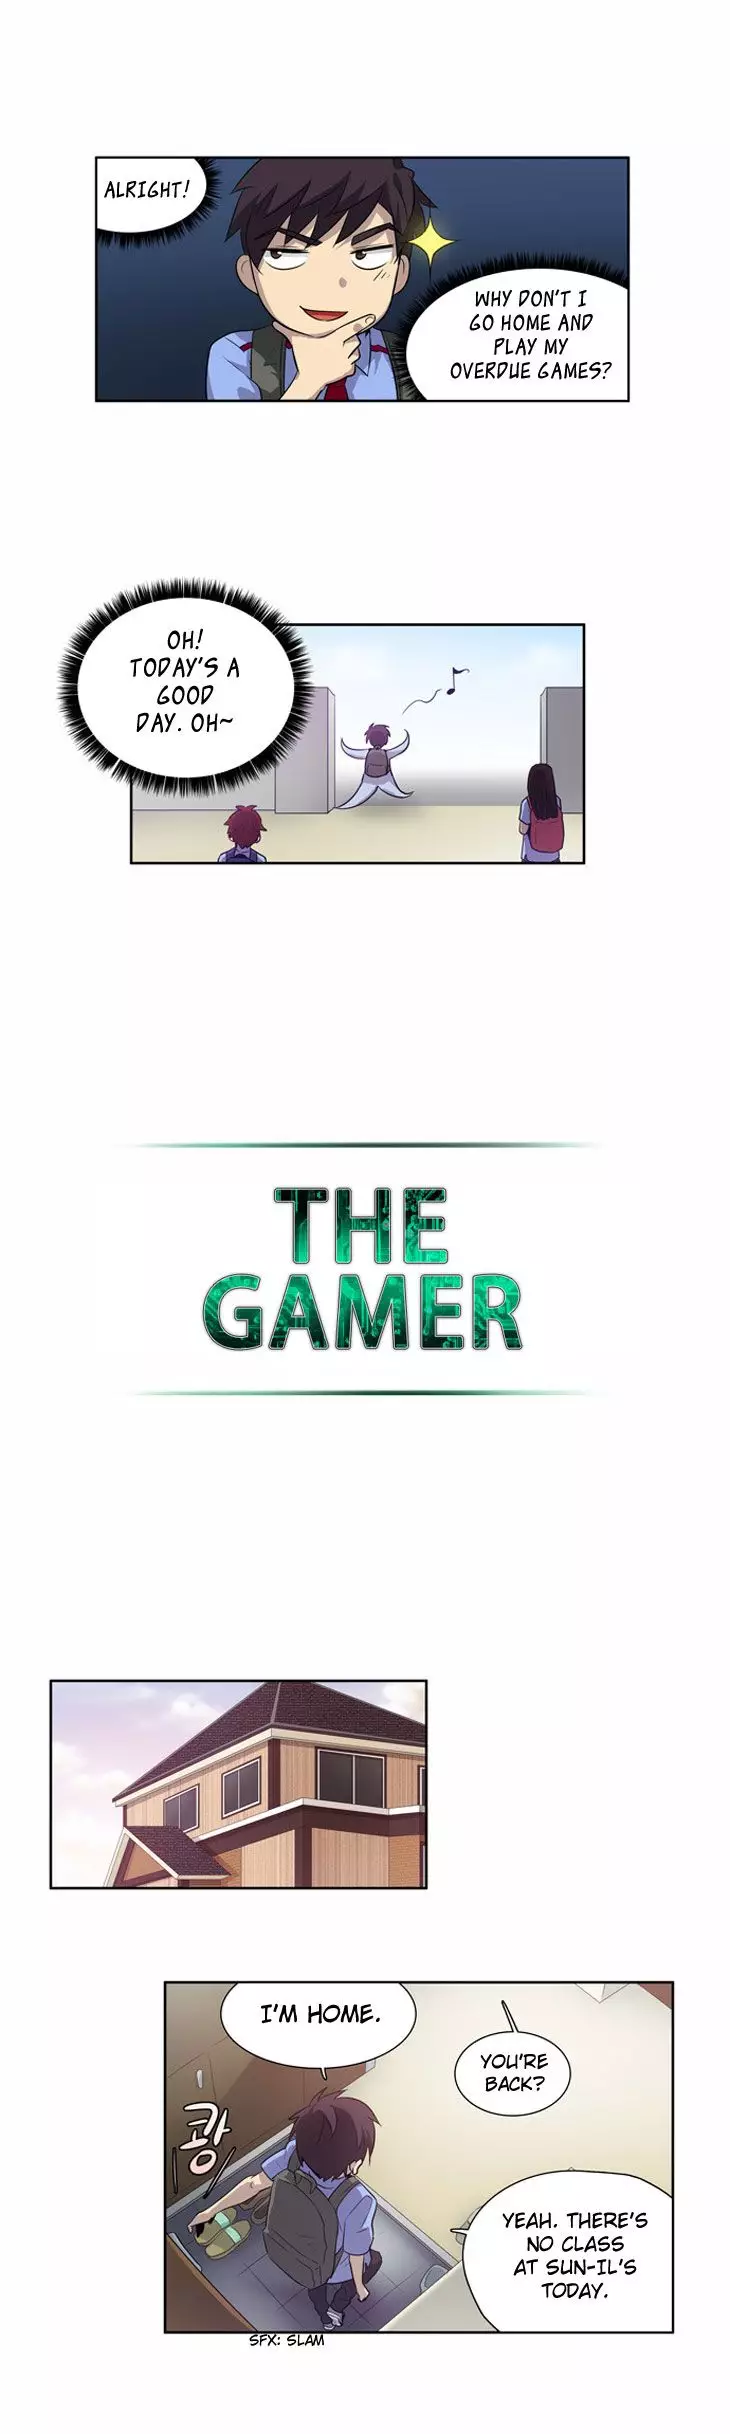 The Gamer - 21 page p_00014